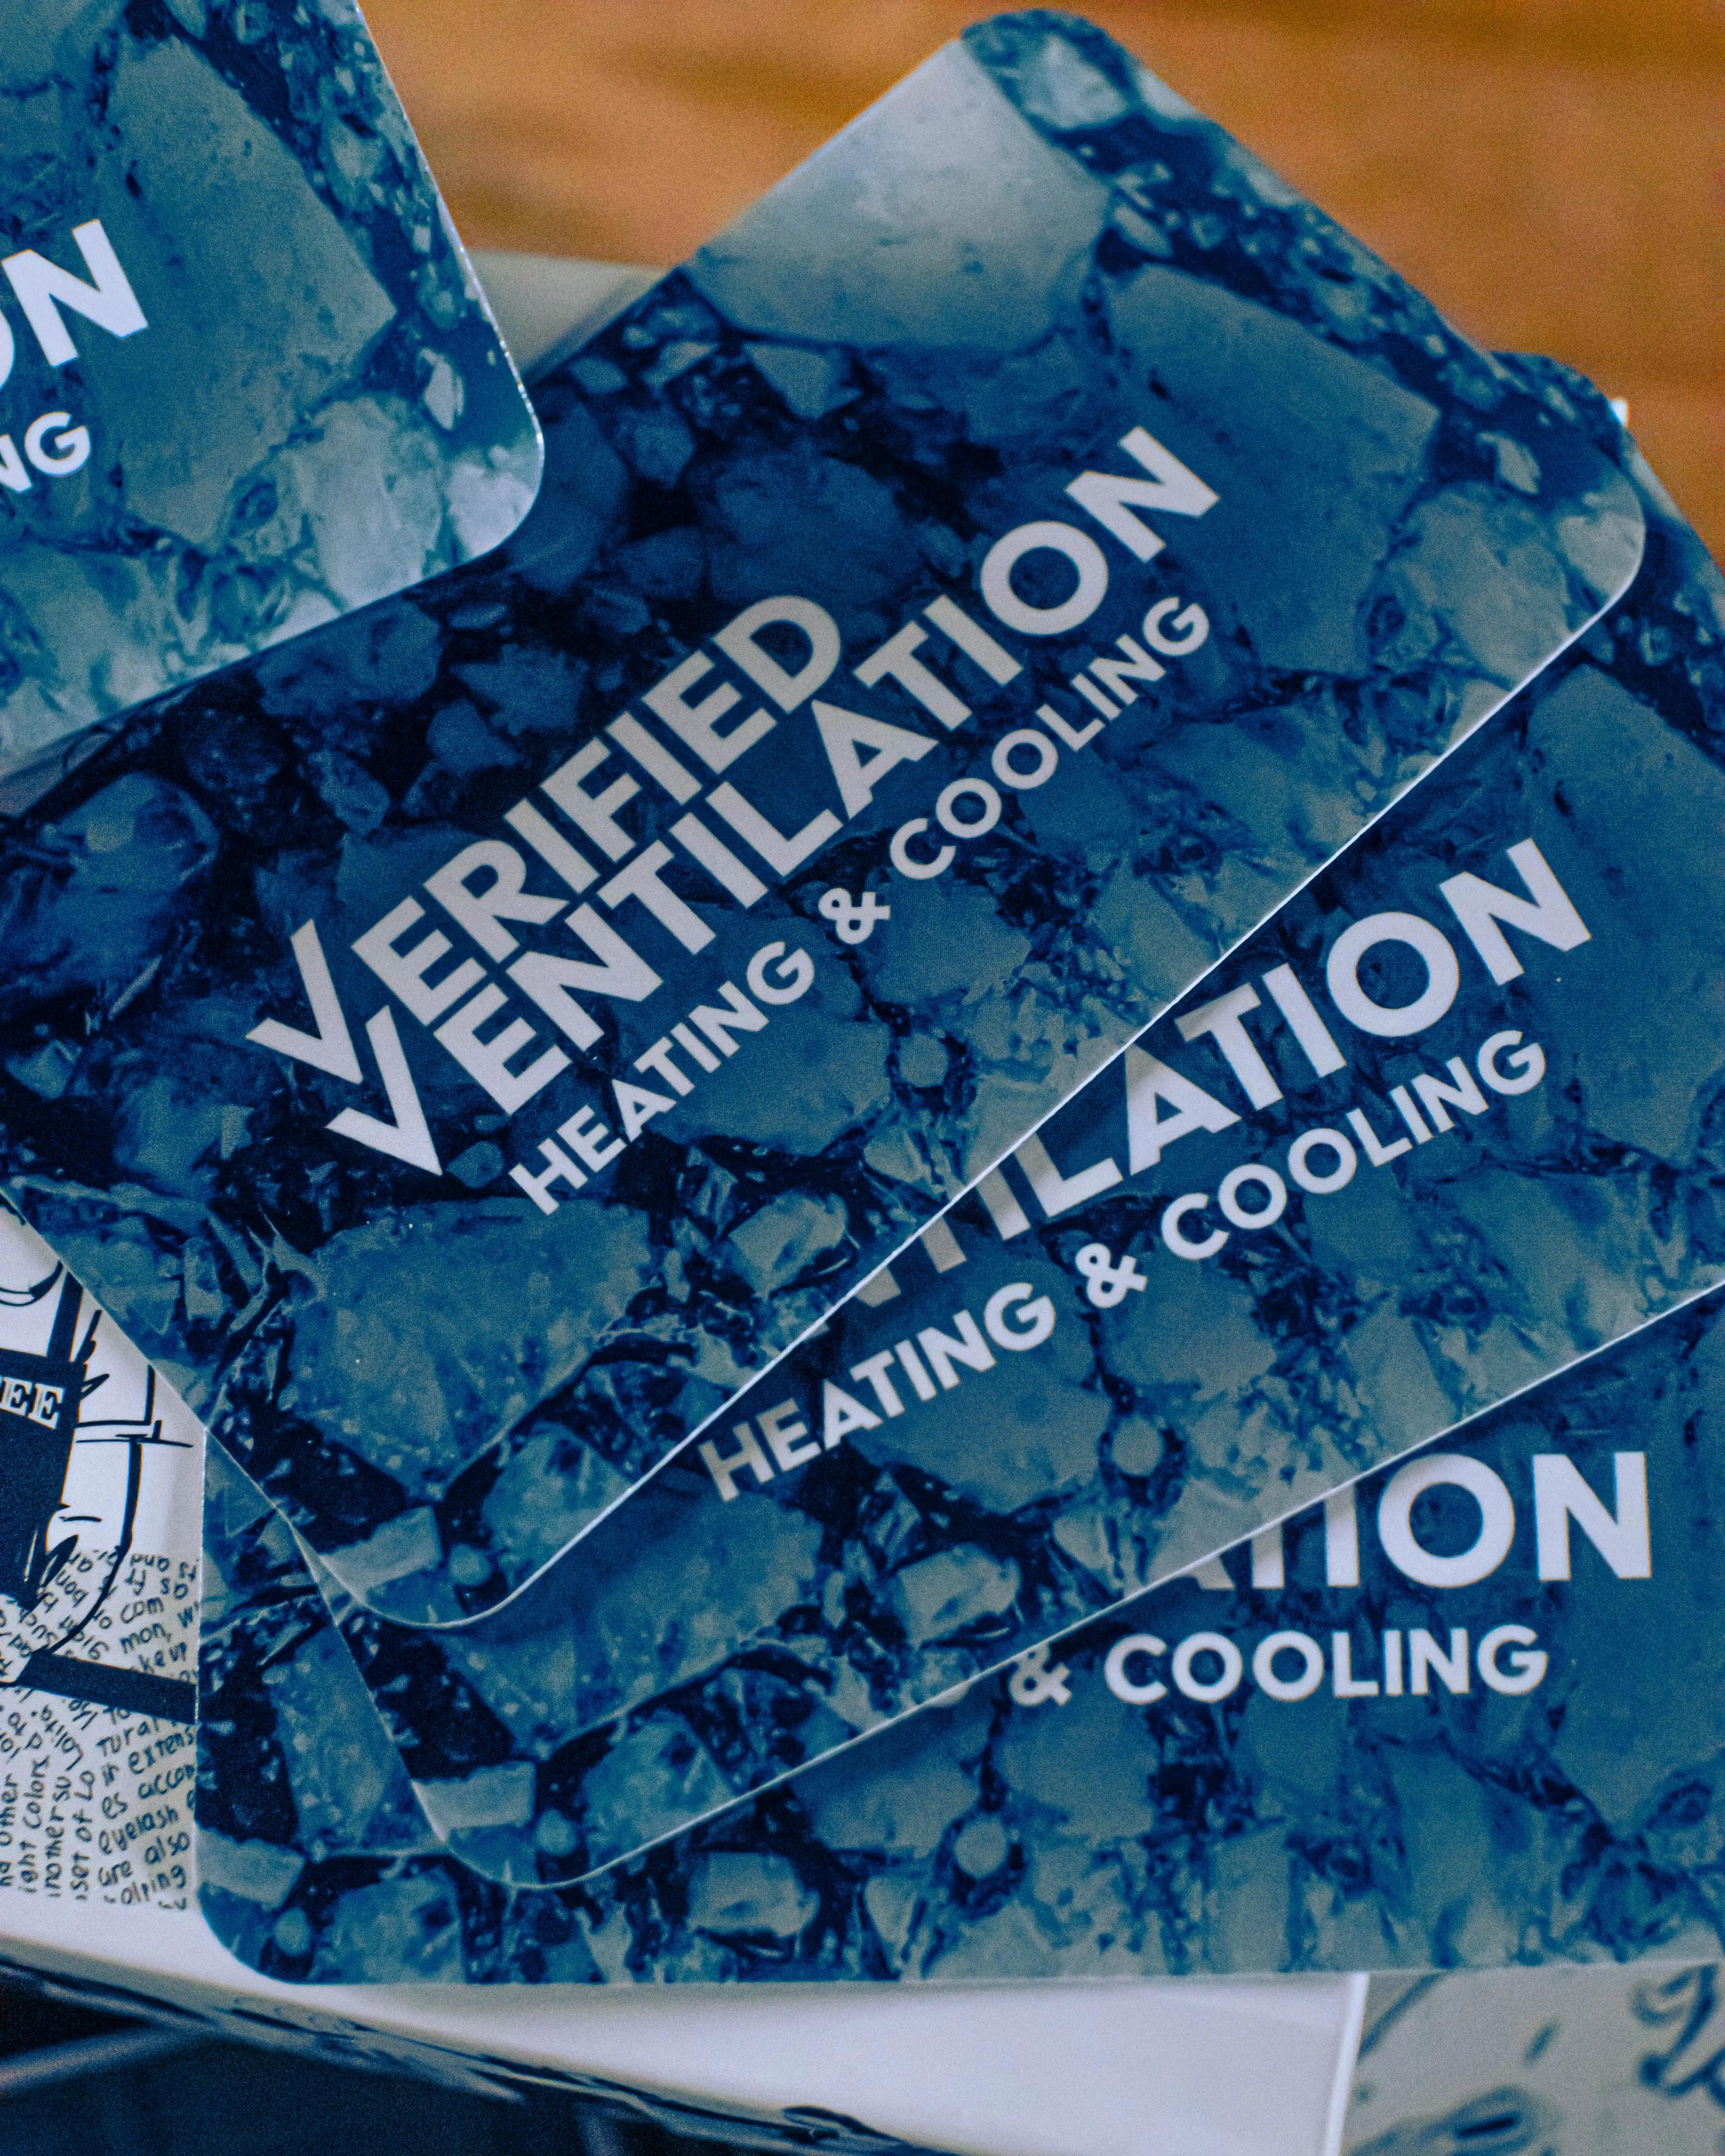 An image of three Verified Ventilation business cards stacked on top of each other.